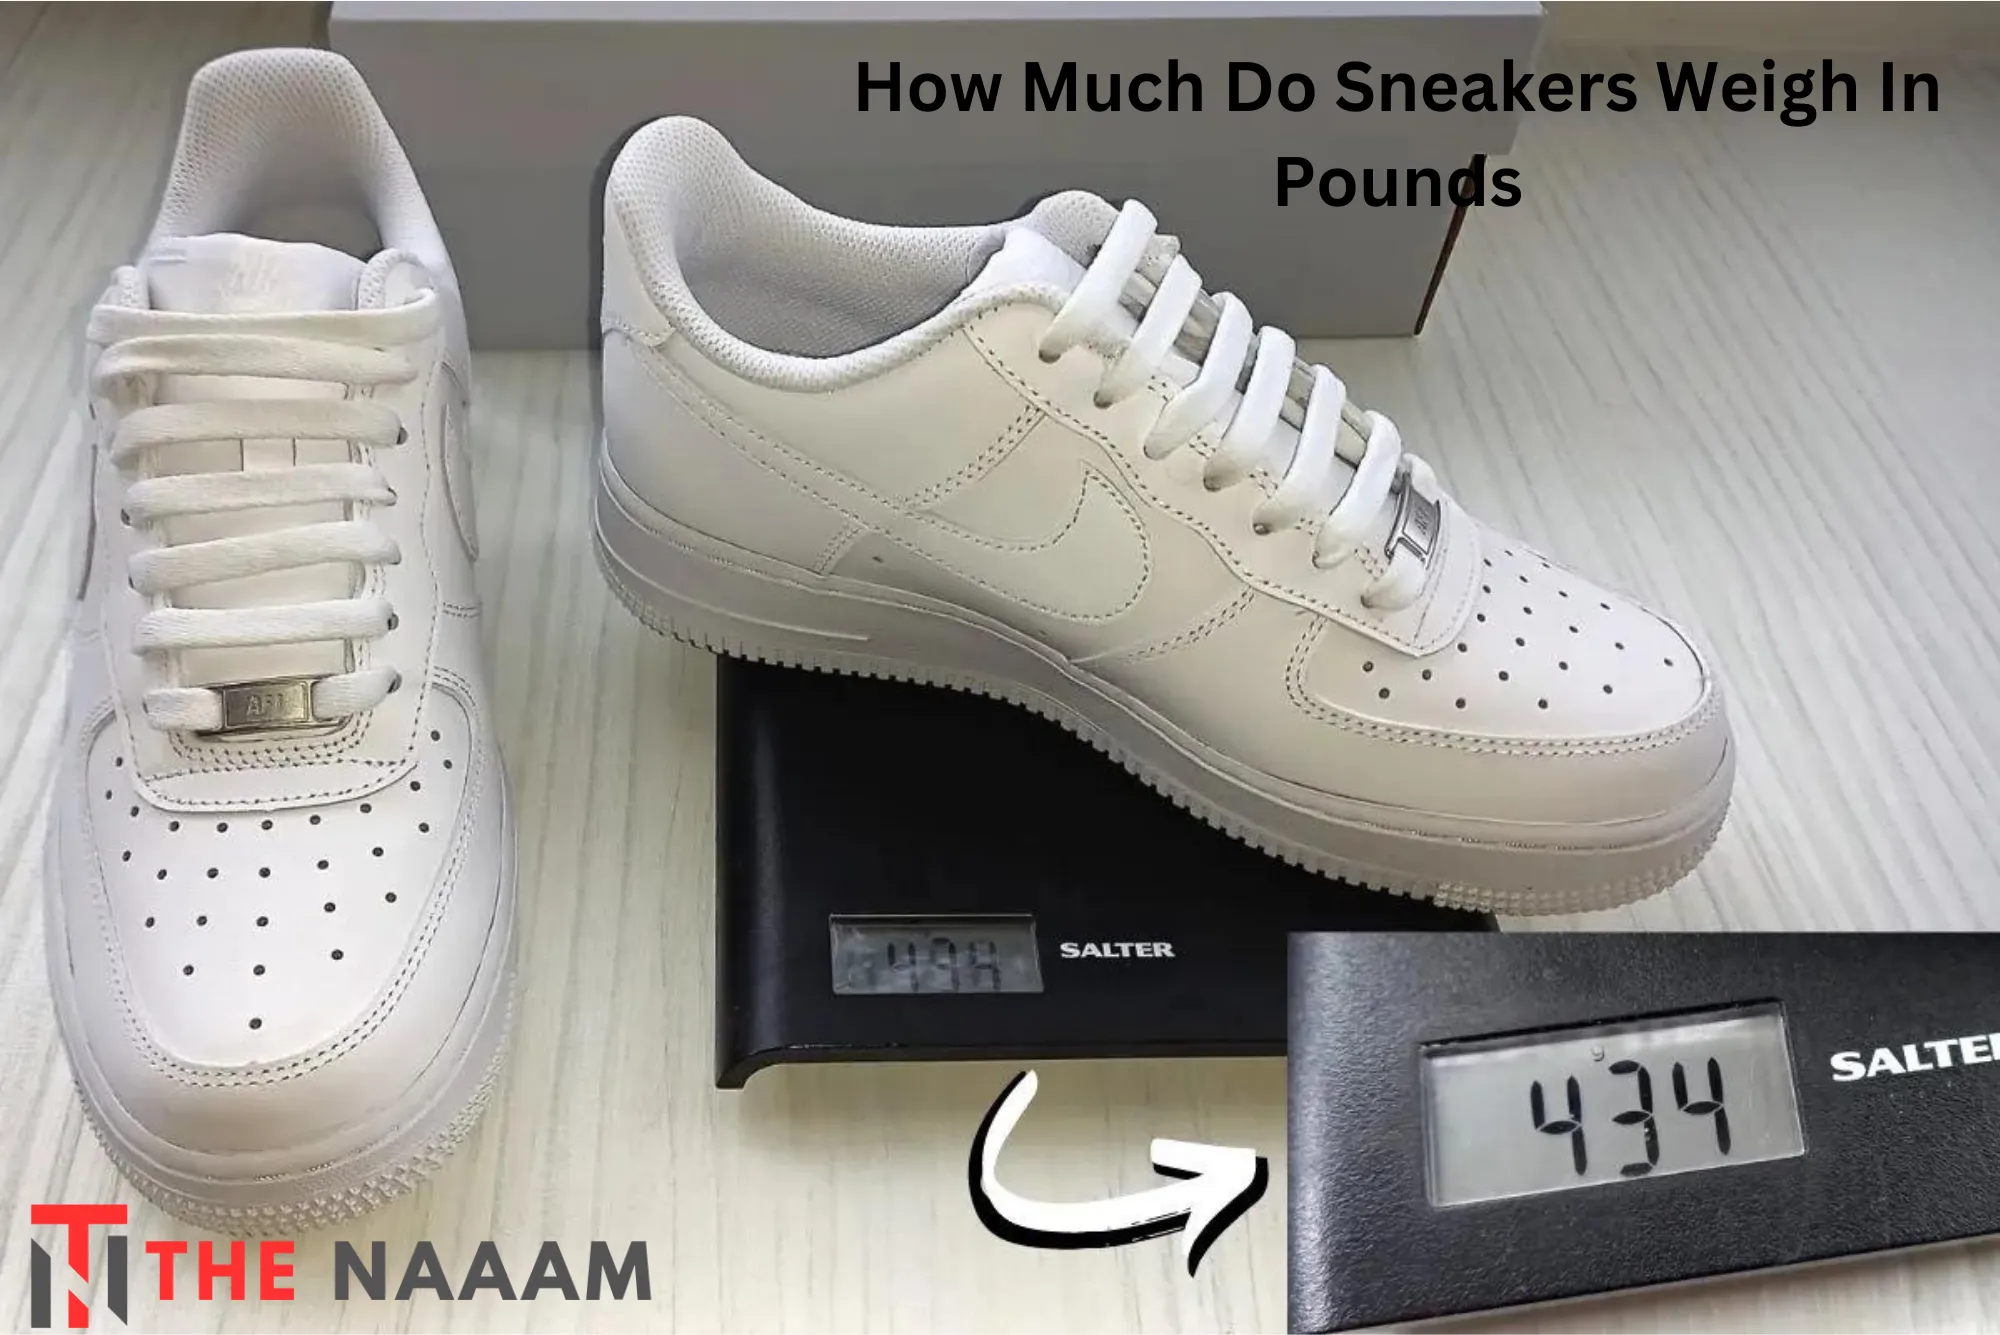 How Much Do Sneakers Weigh In Pounds